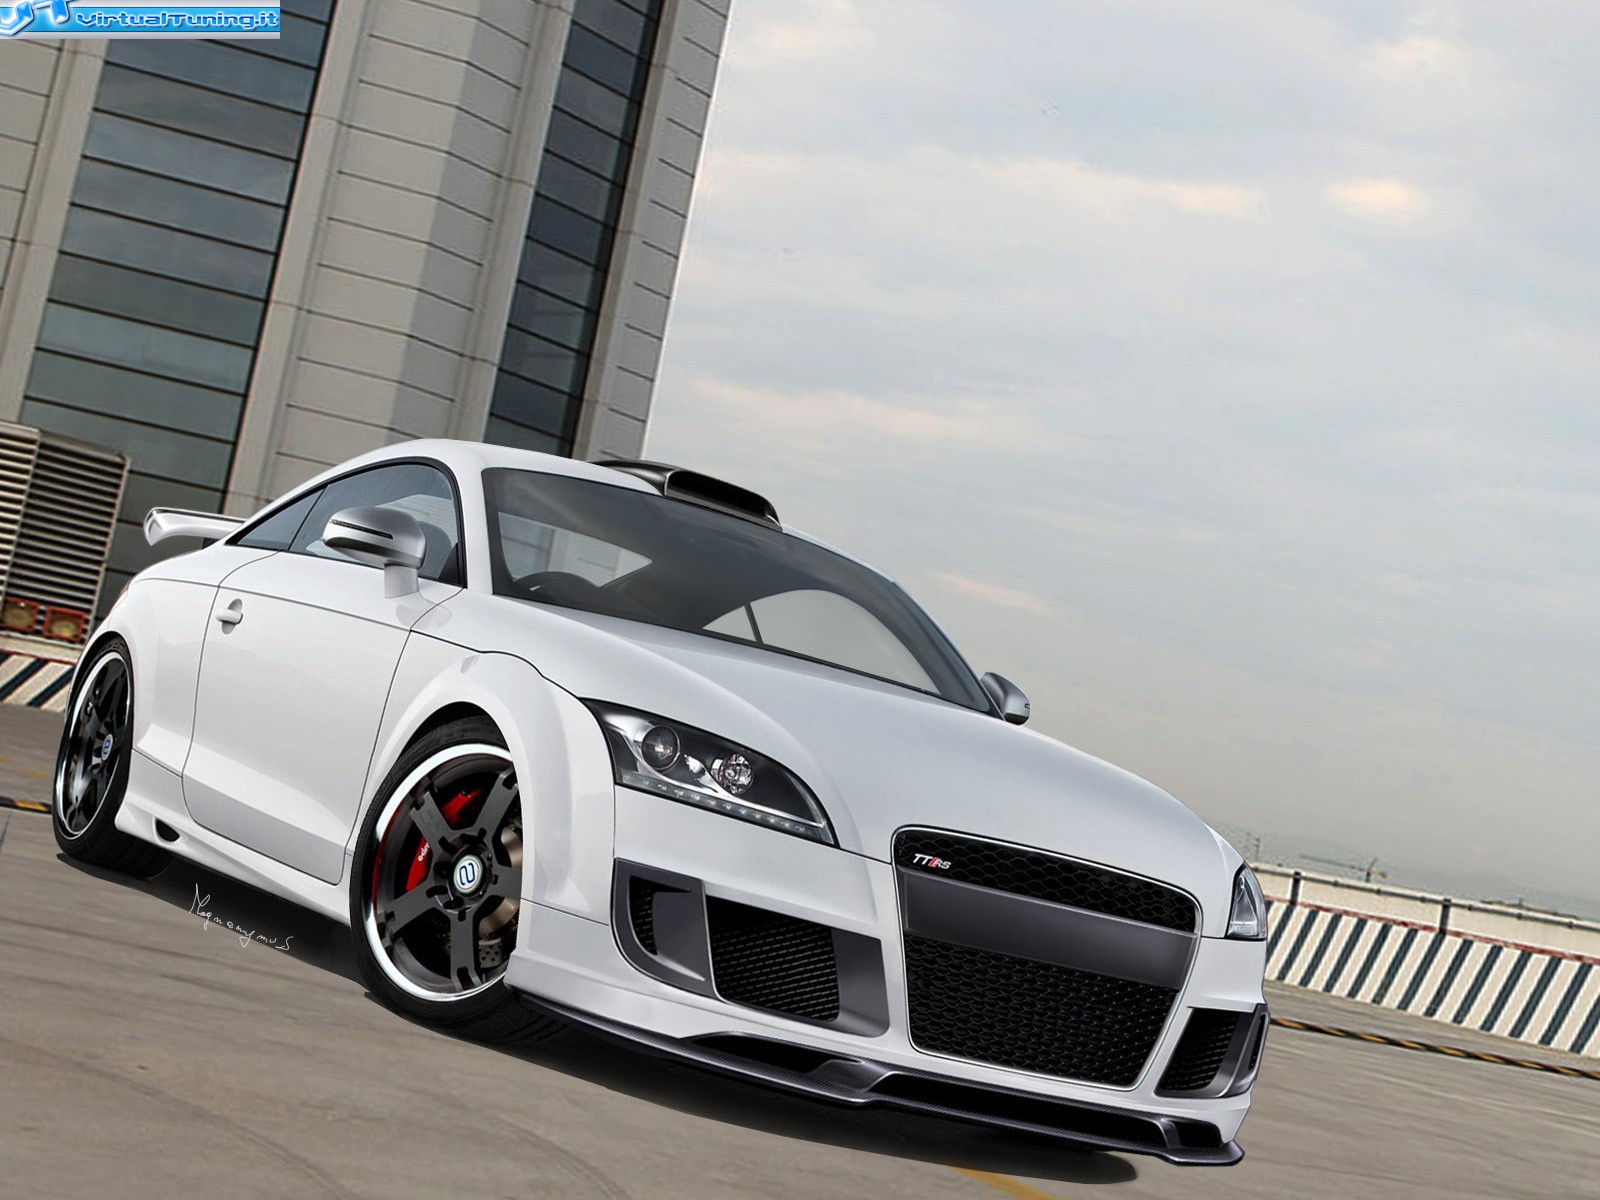 VirtualTuning AUDI TT-Rs by Magnanymus